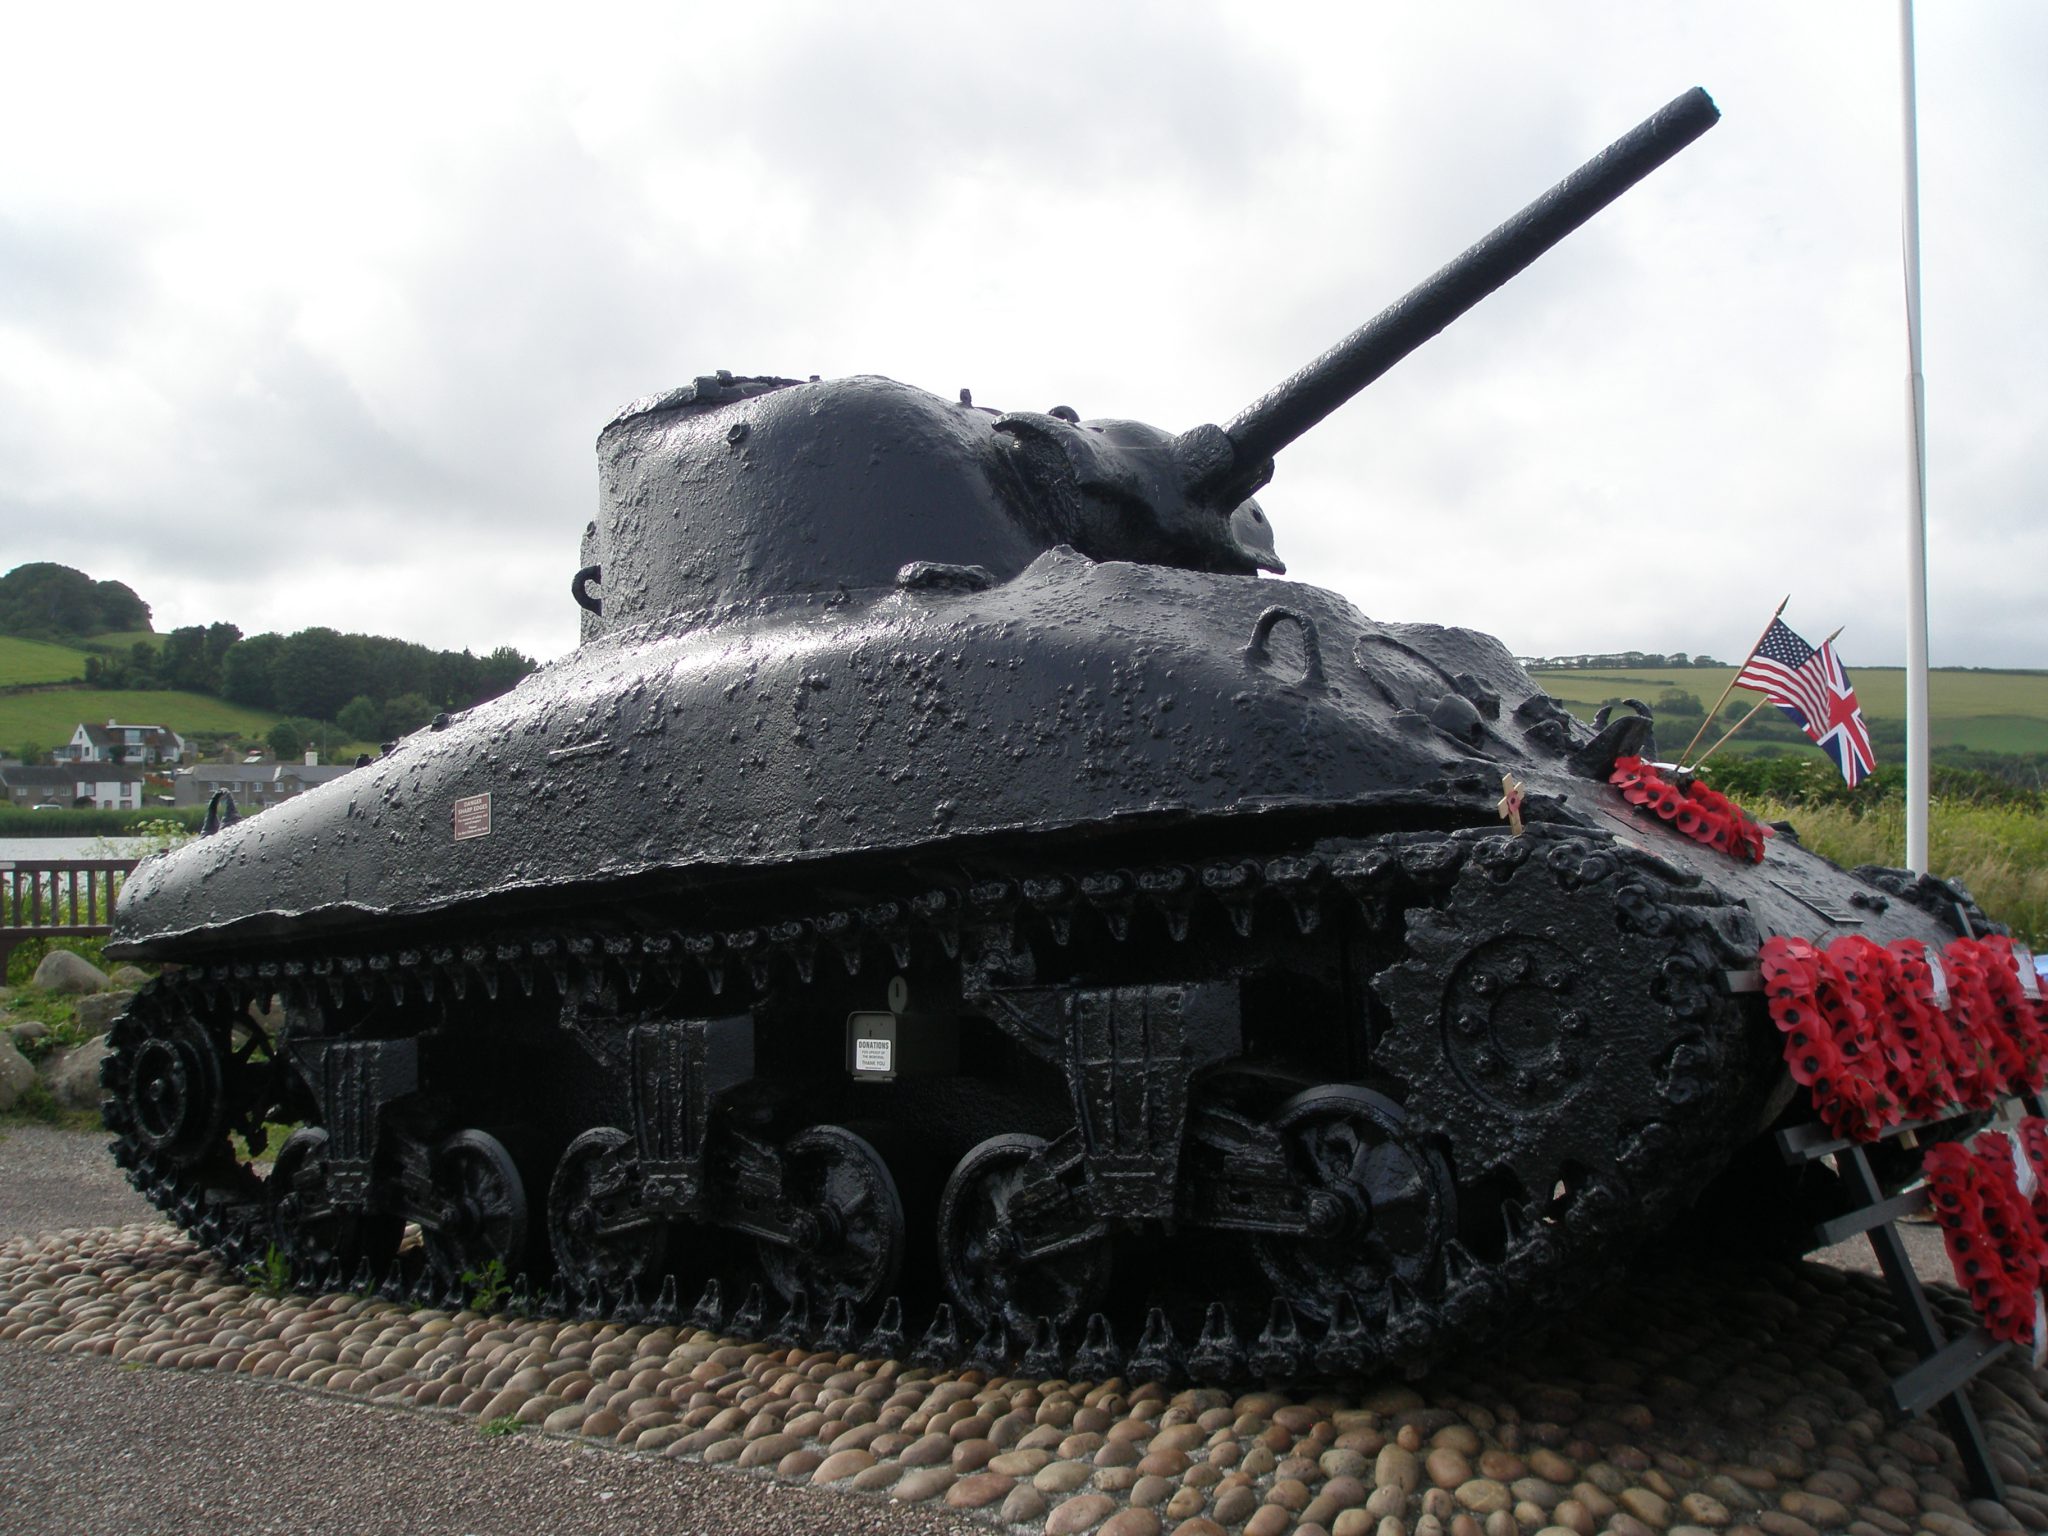 A Sherman Tank, lost at sea on April 28, 1944, and now dragged ashore. On display at Torcross.